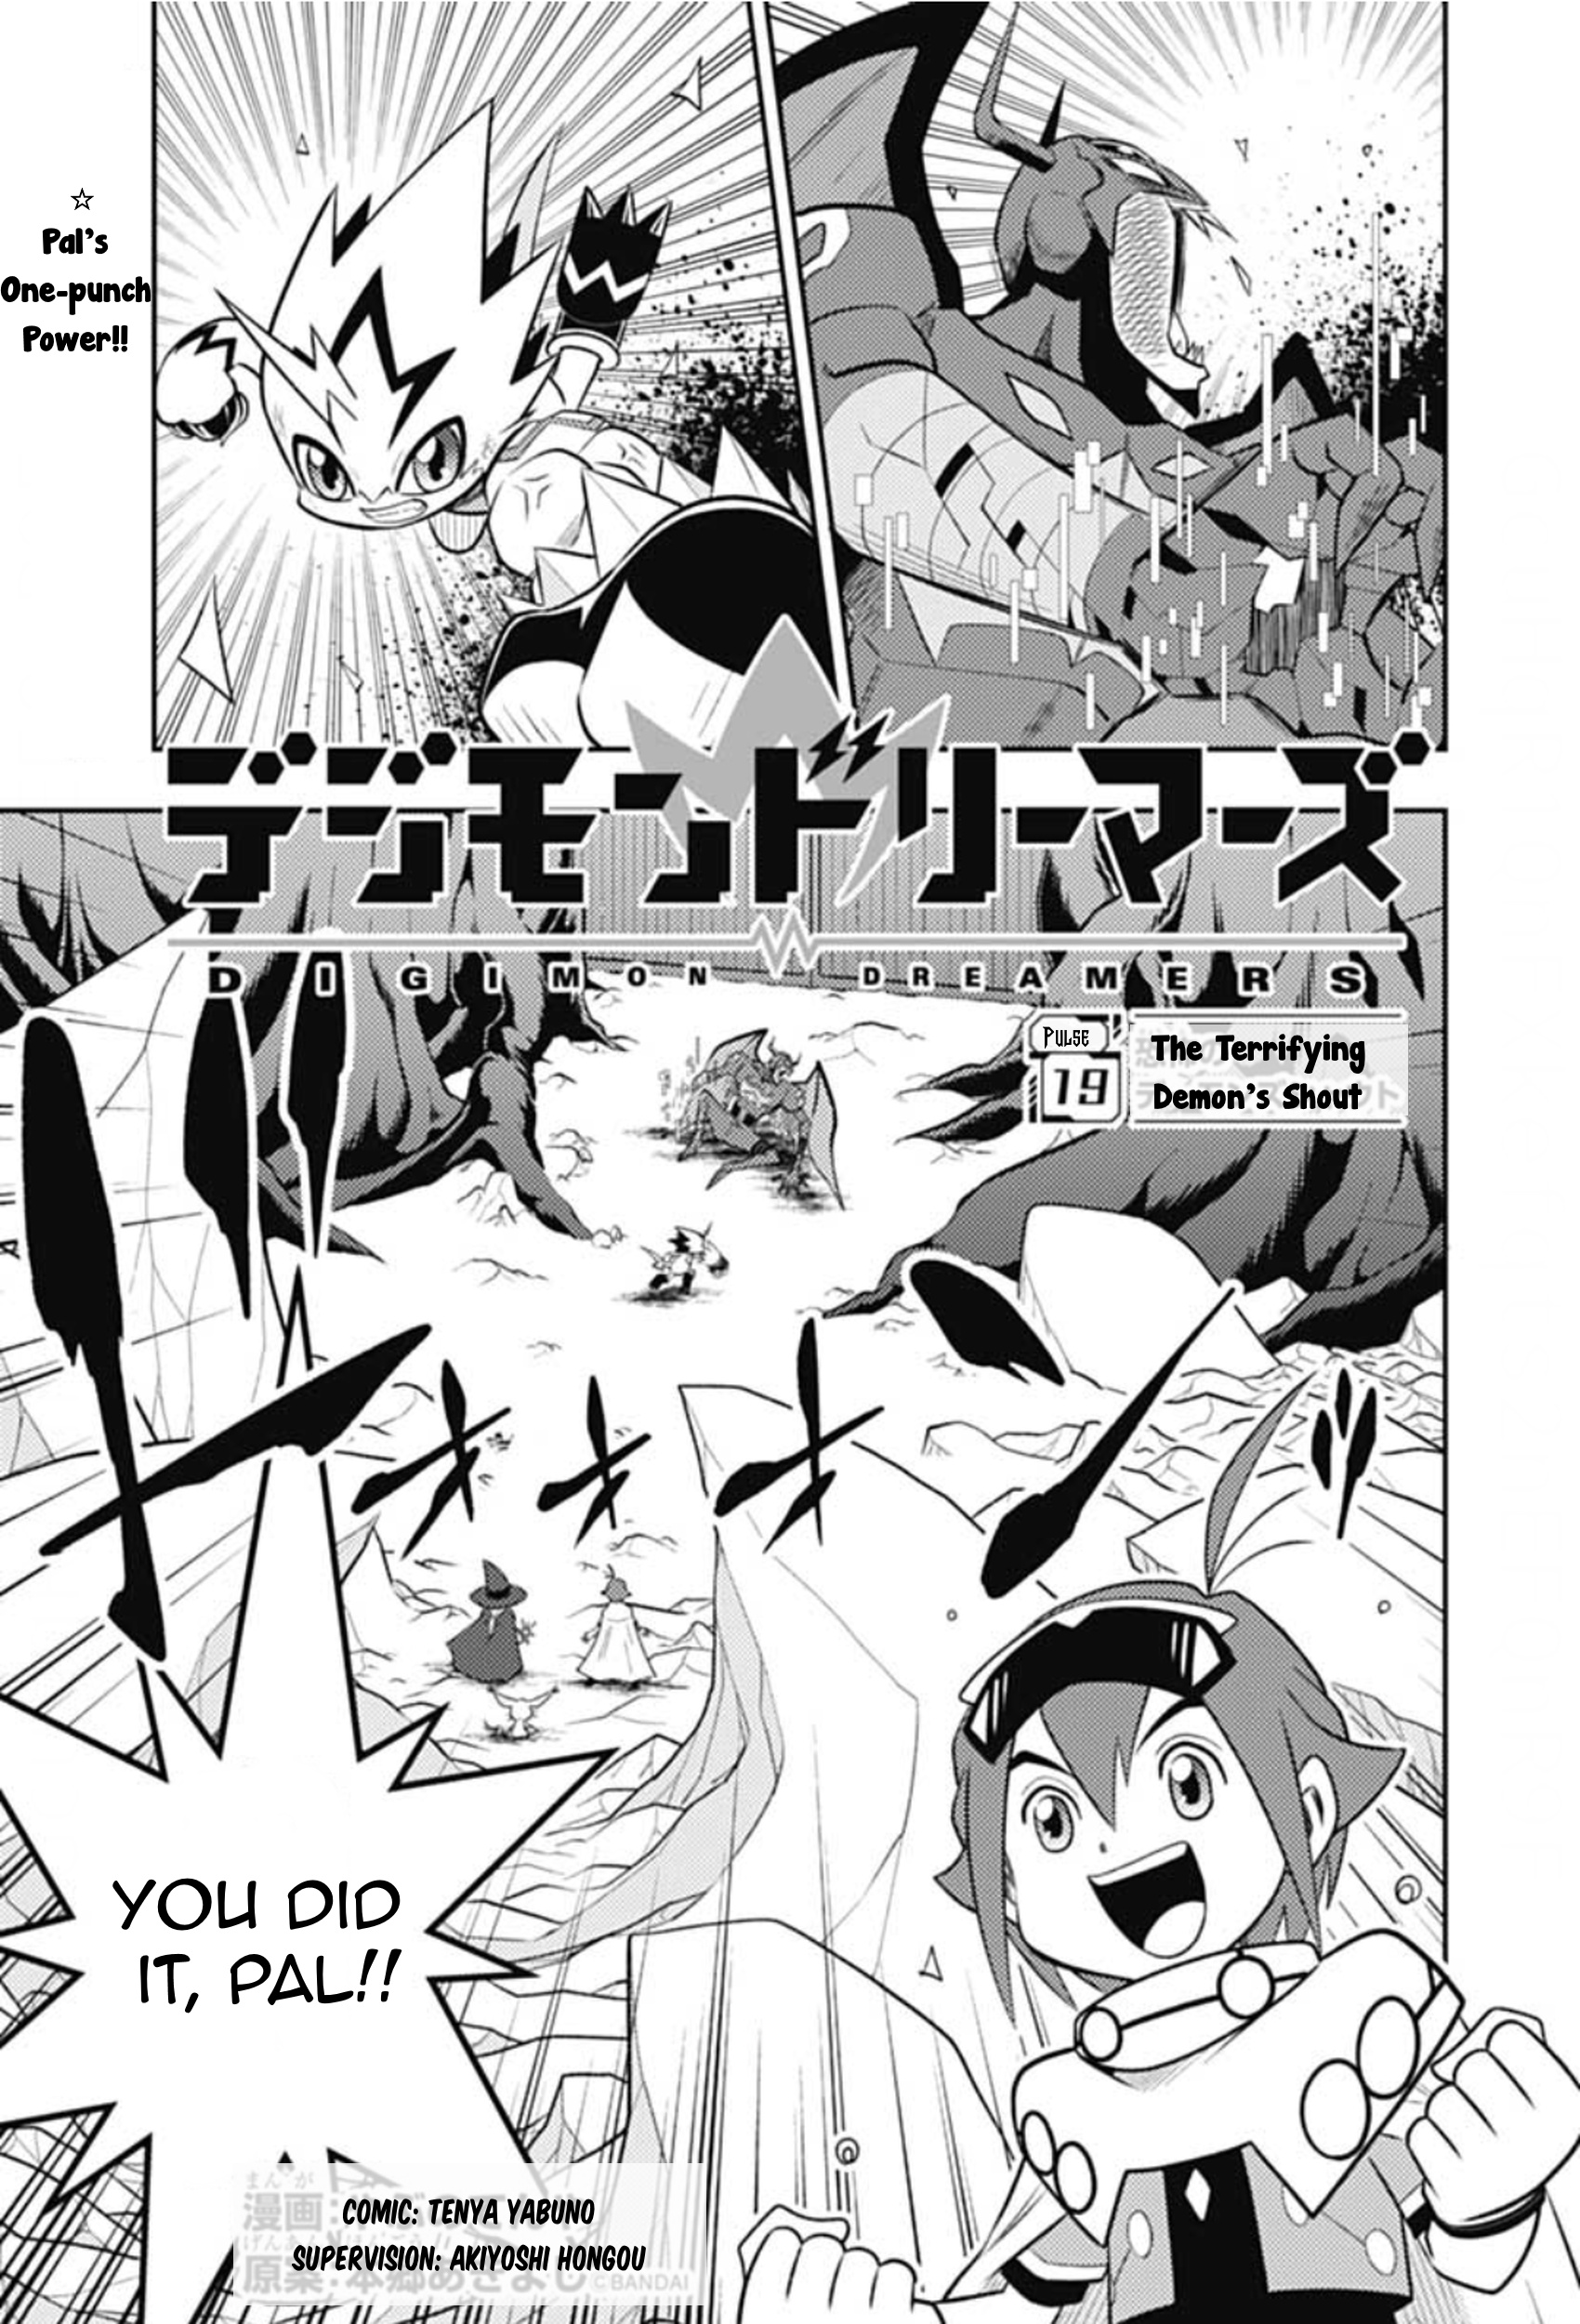 Digimon Dreamers Vol.2 Chapter 19: The Terrifying Demon's Shout - Picture 3